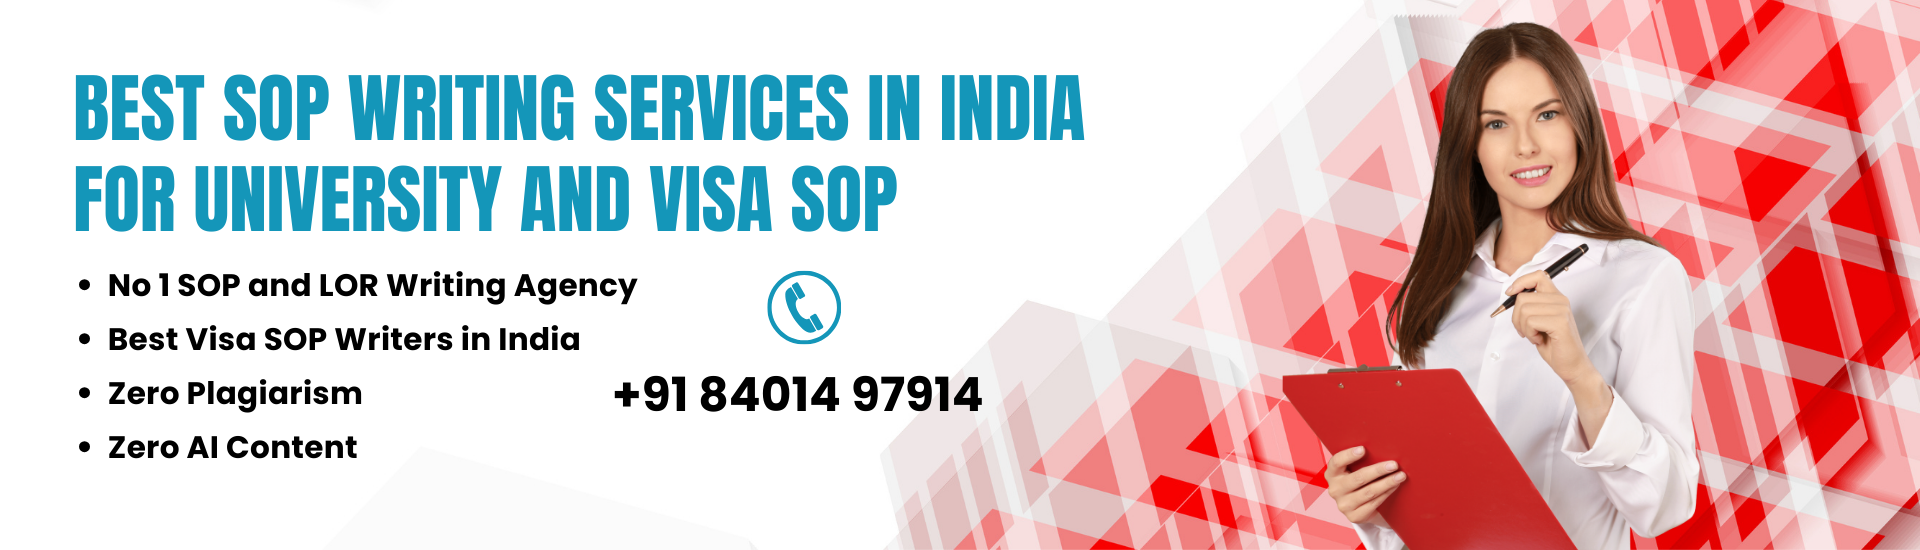 Best SOP Writing Services in India for University and Visa SOP